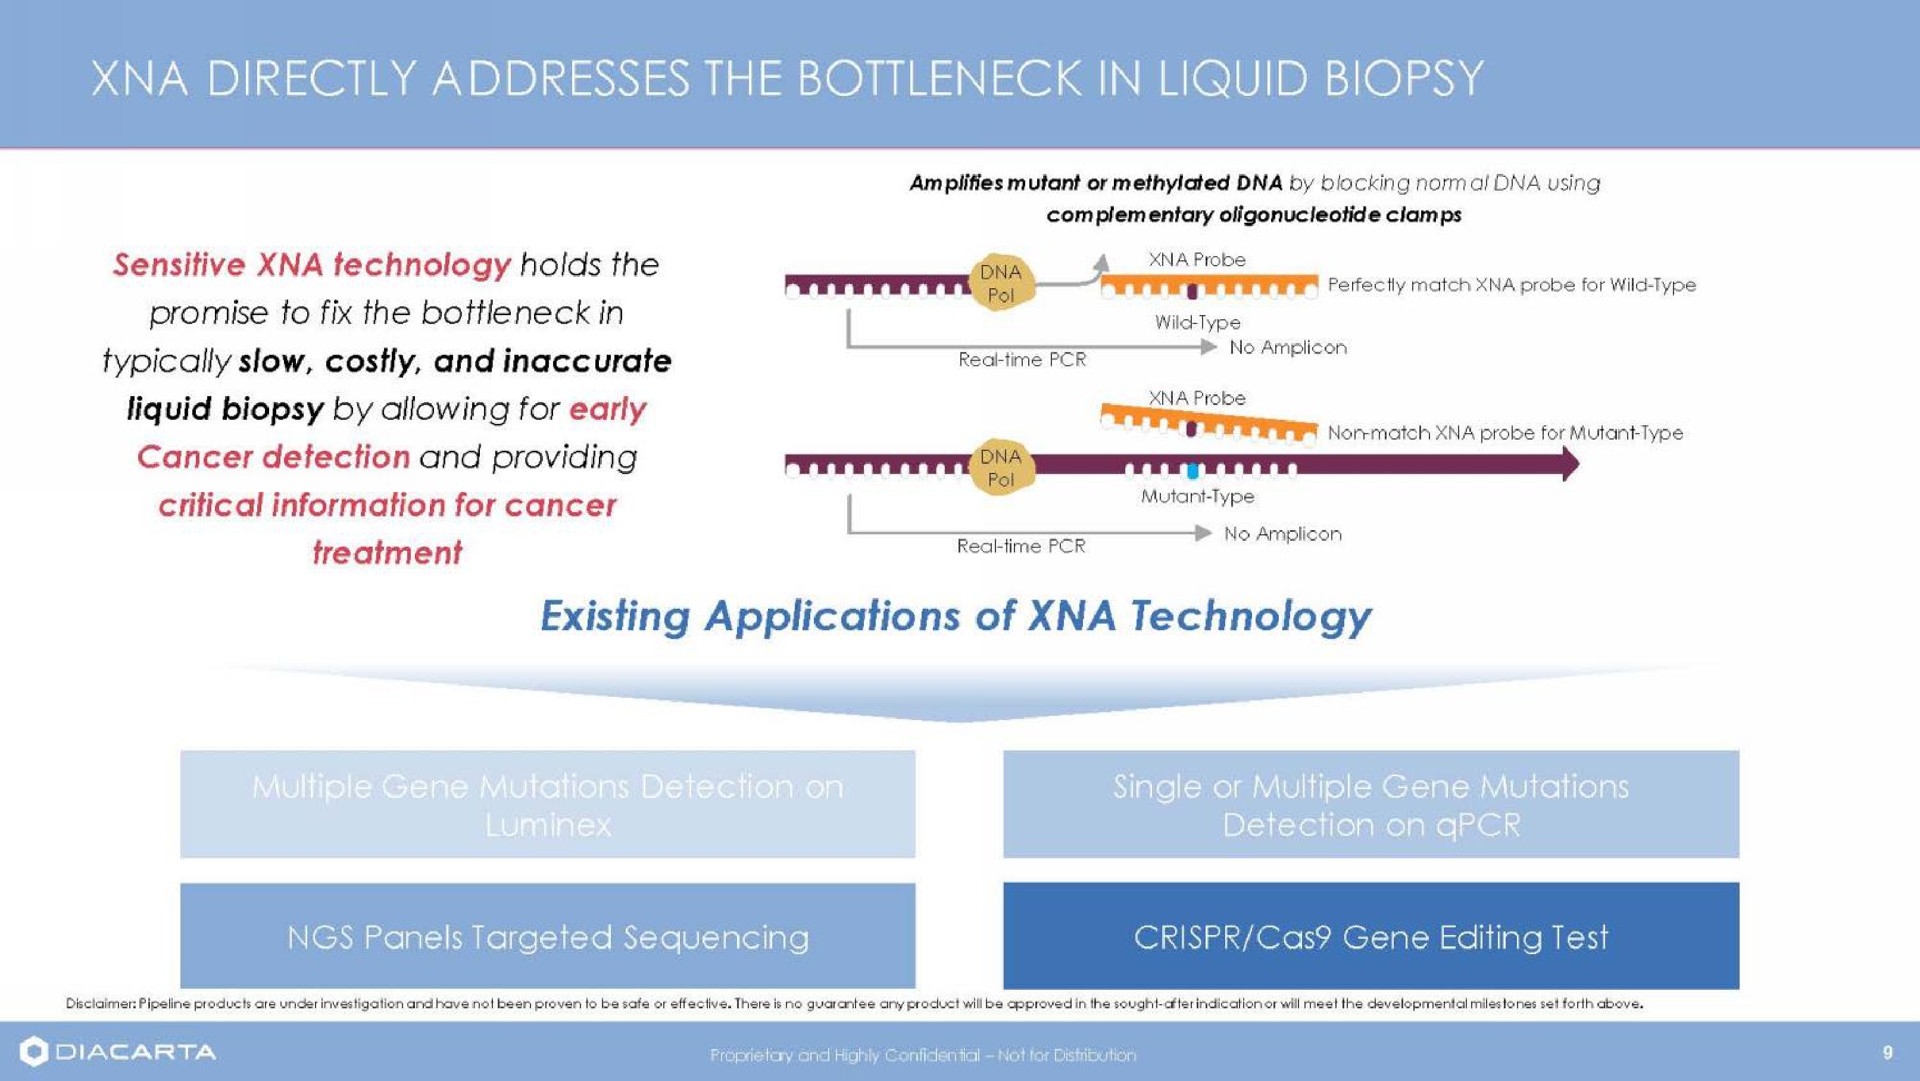 directly addresses the bottleneck in liquid biopsy typically slow costly and inaccurate epee existing applications of technology single or multiple gene mutations | DiaCarta